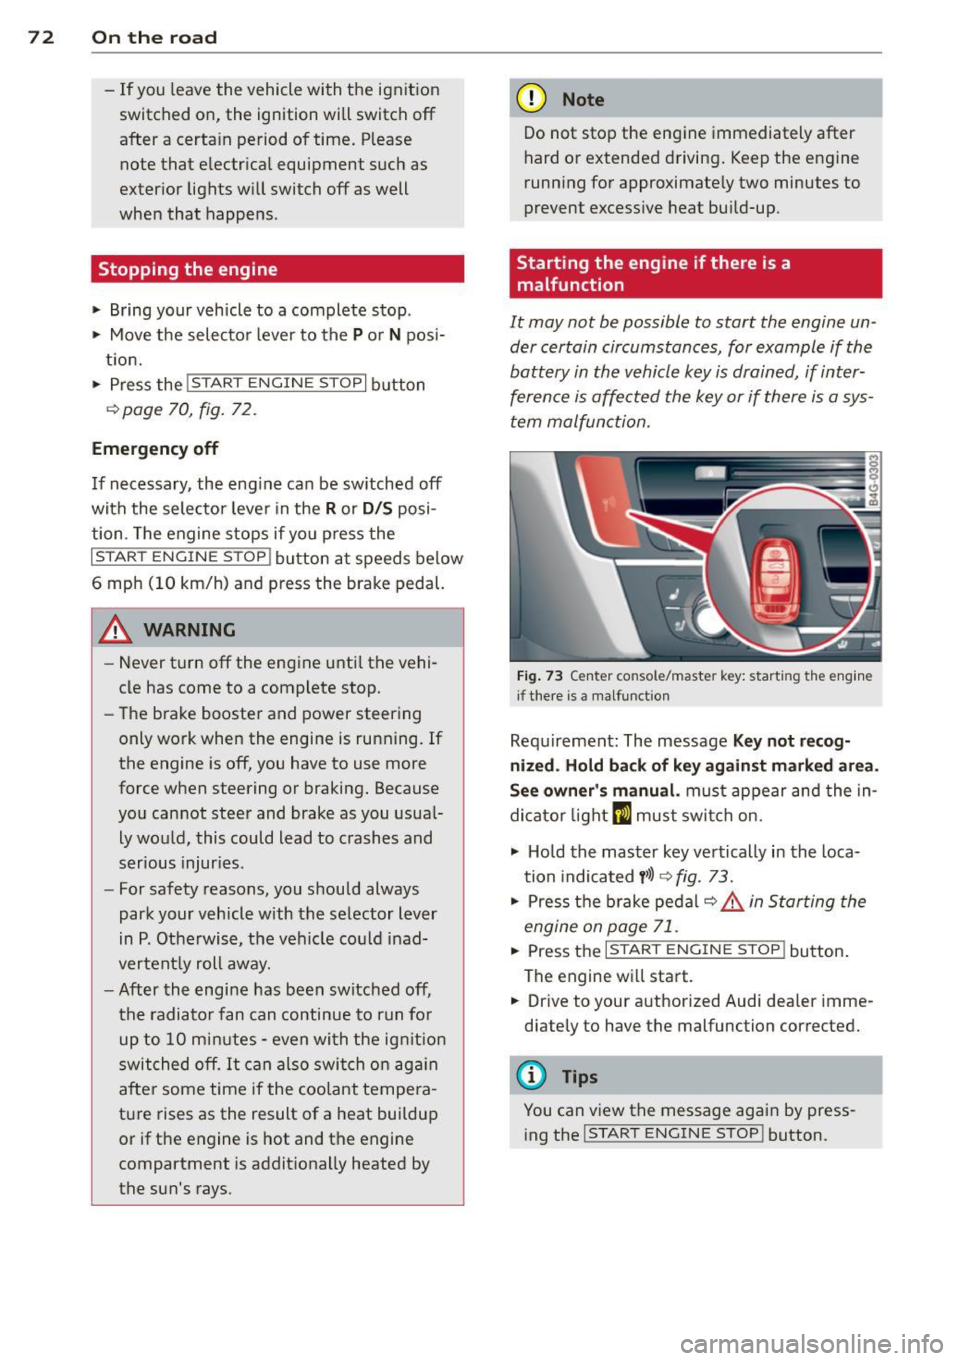 AUDI S6 2012  Owners Manual 7 2  On  the road 
-If yo u  leave  the  vehicle  wi th the  ignition 
switched  on,  the  ignition  will switch  off 
after  a  certa in period  of  time . Please 
note  that  e lectrica l equipment 